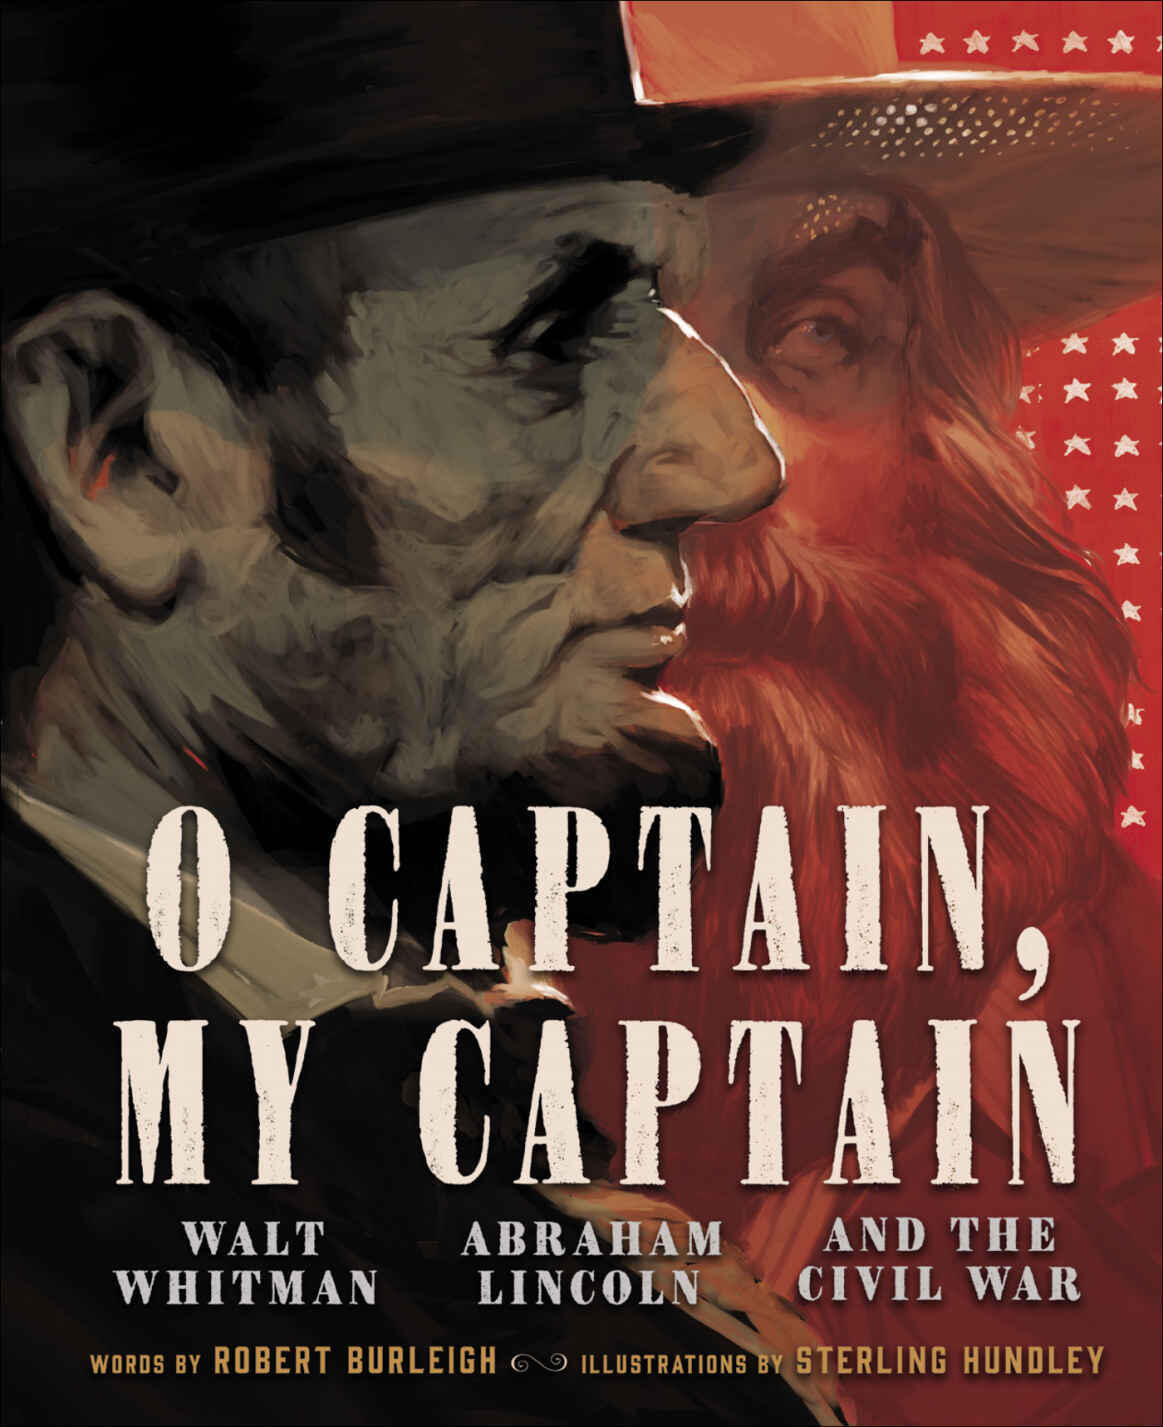 A book cover reading "O Captain, My Captian" Walt Whitman, Abraham Lincoln and the Civil War" with illustrations of Lincoln and Whitman.